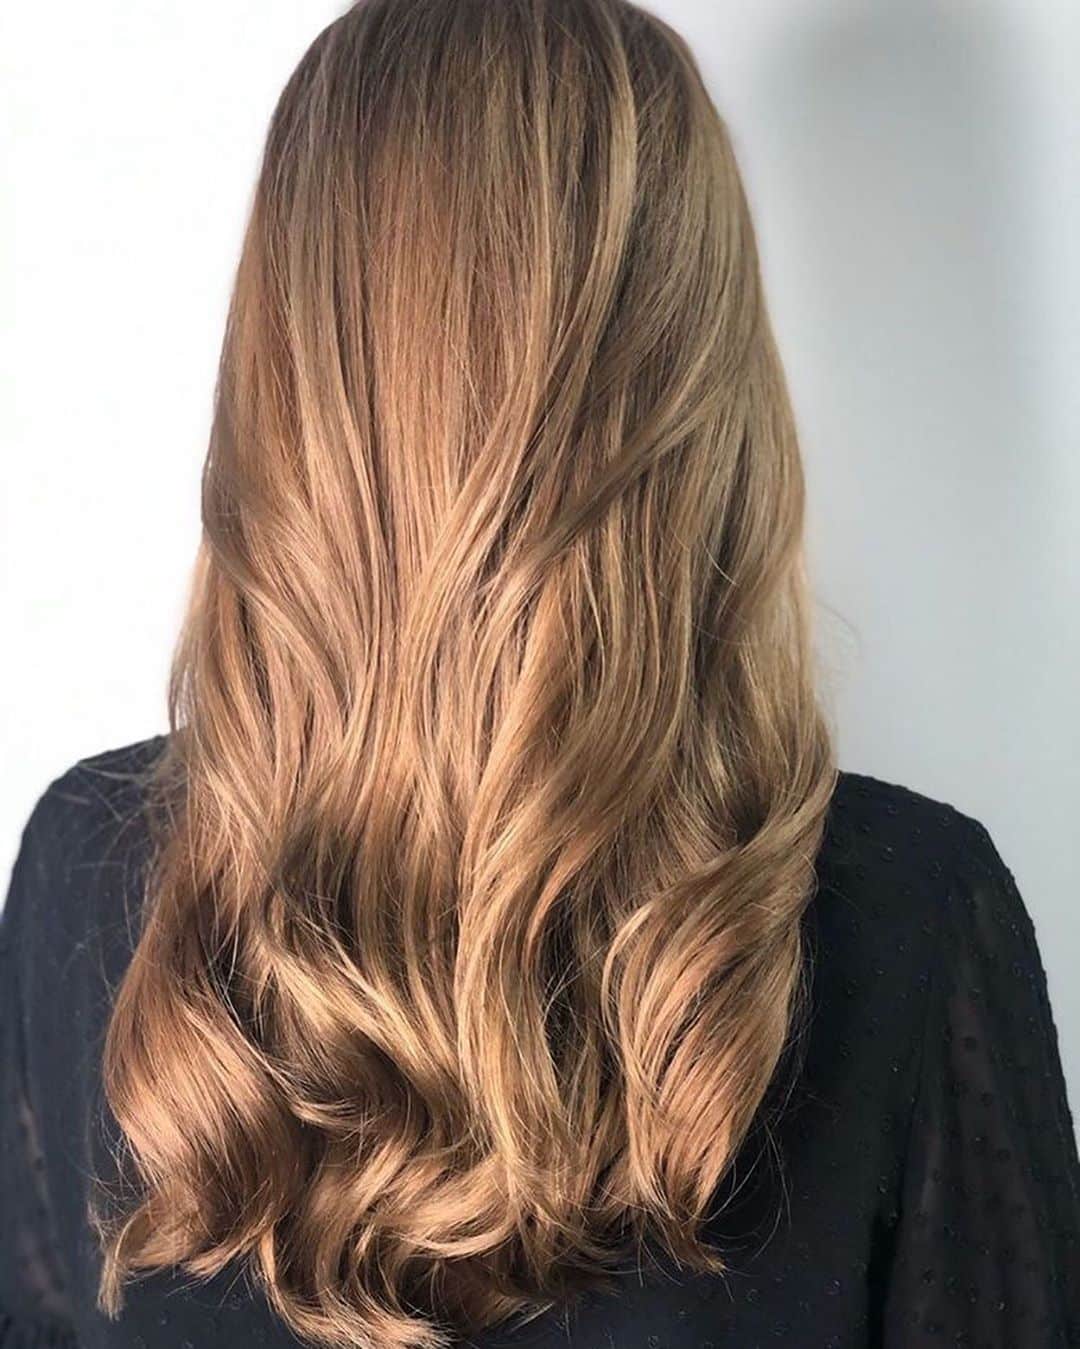 Light Golden Brown Hair Color: What It Looks Like & 17 Trendy Ideas